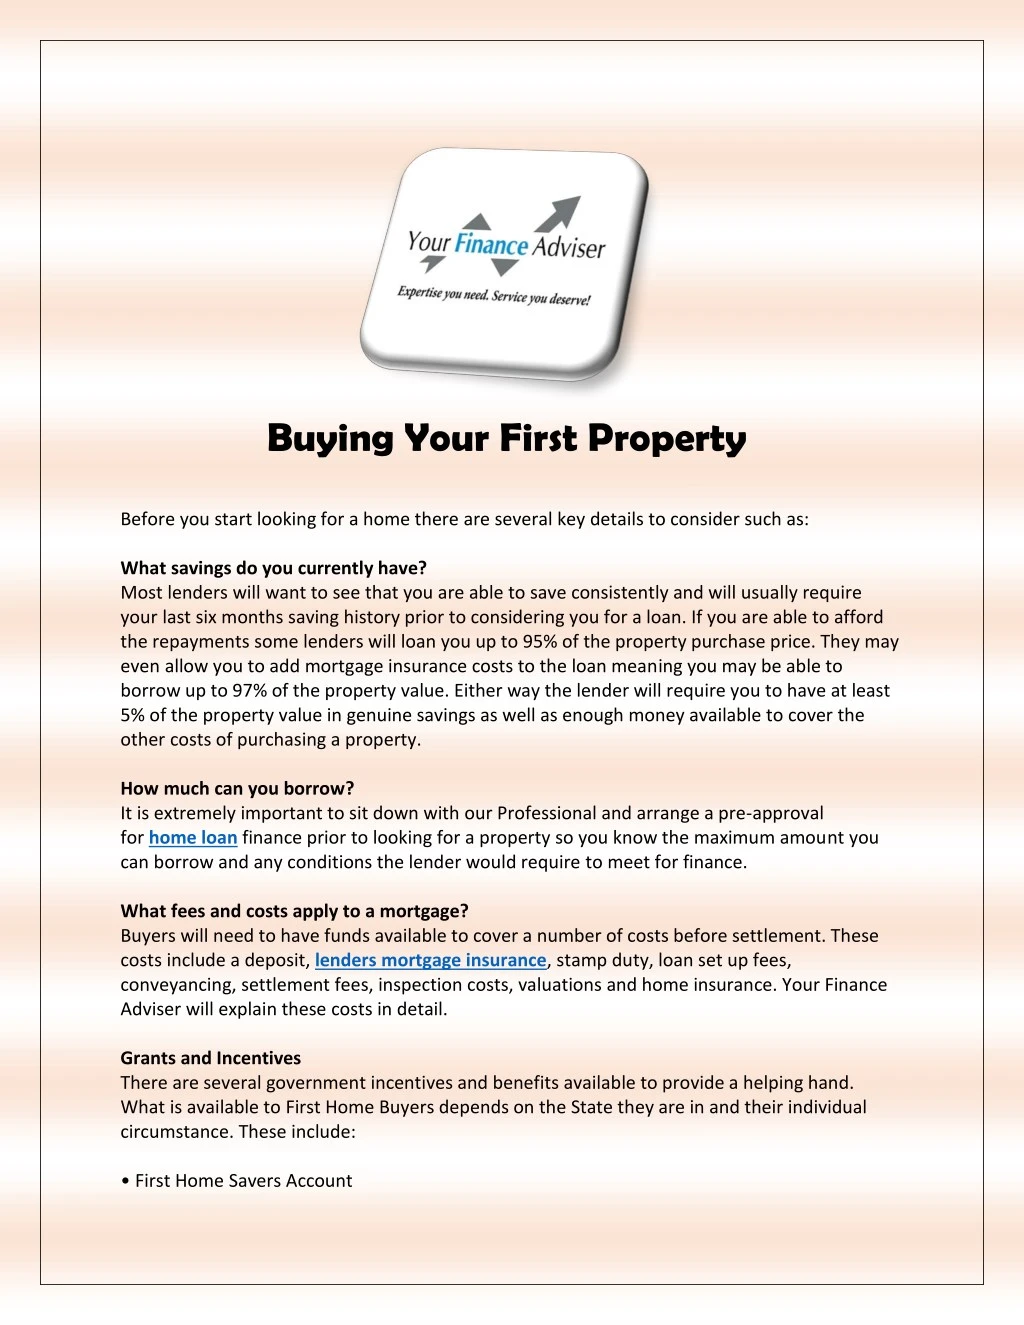 buying your first property